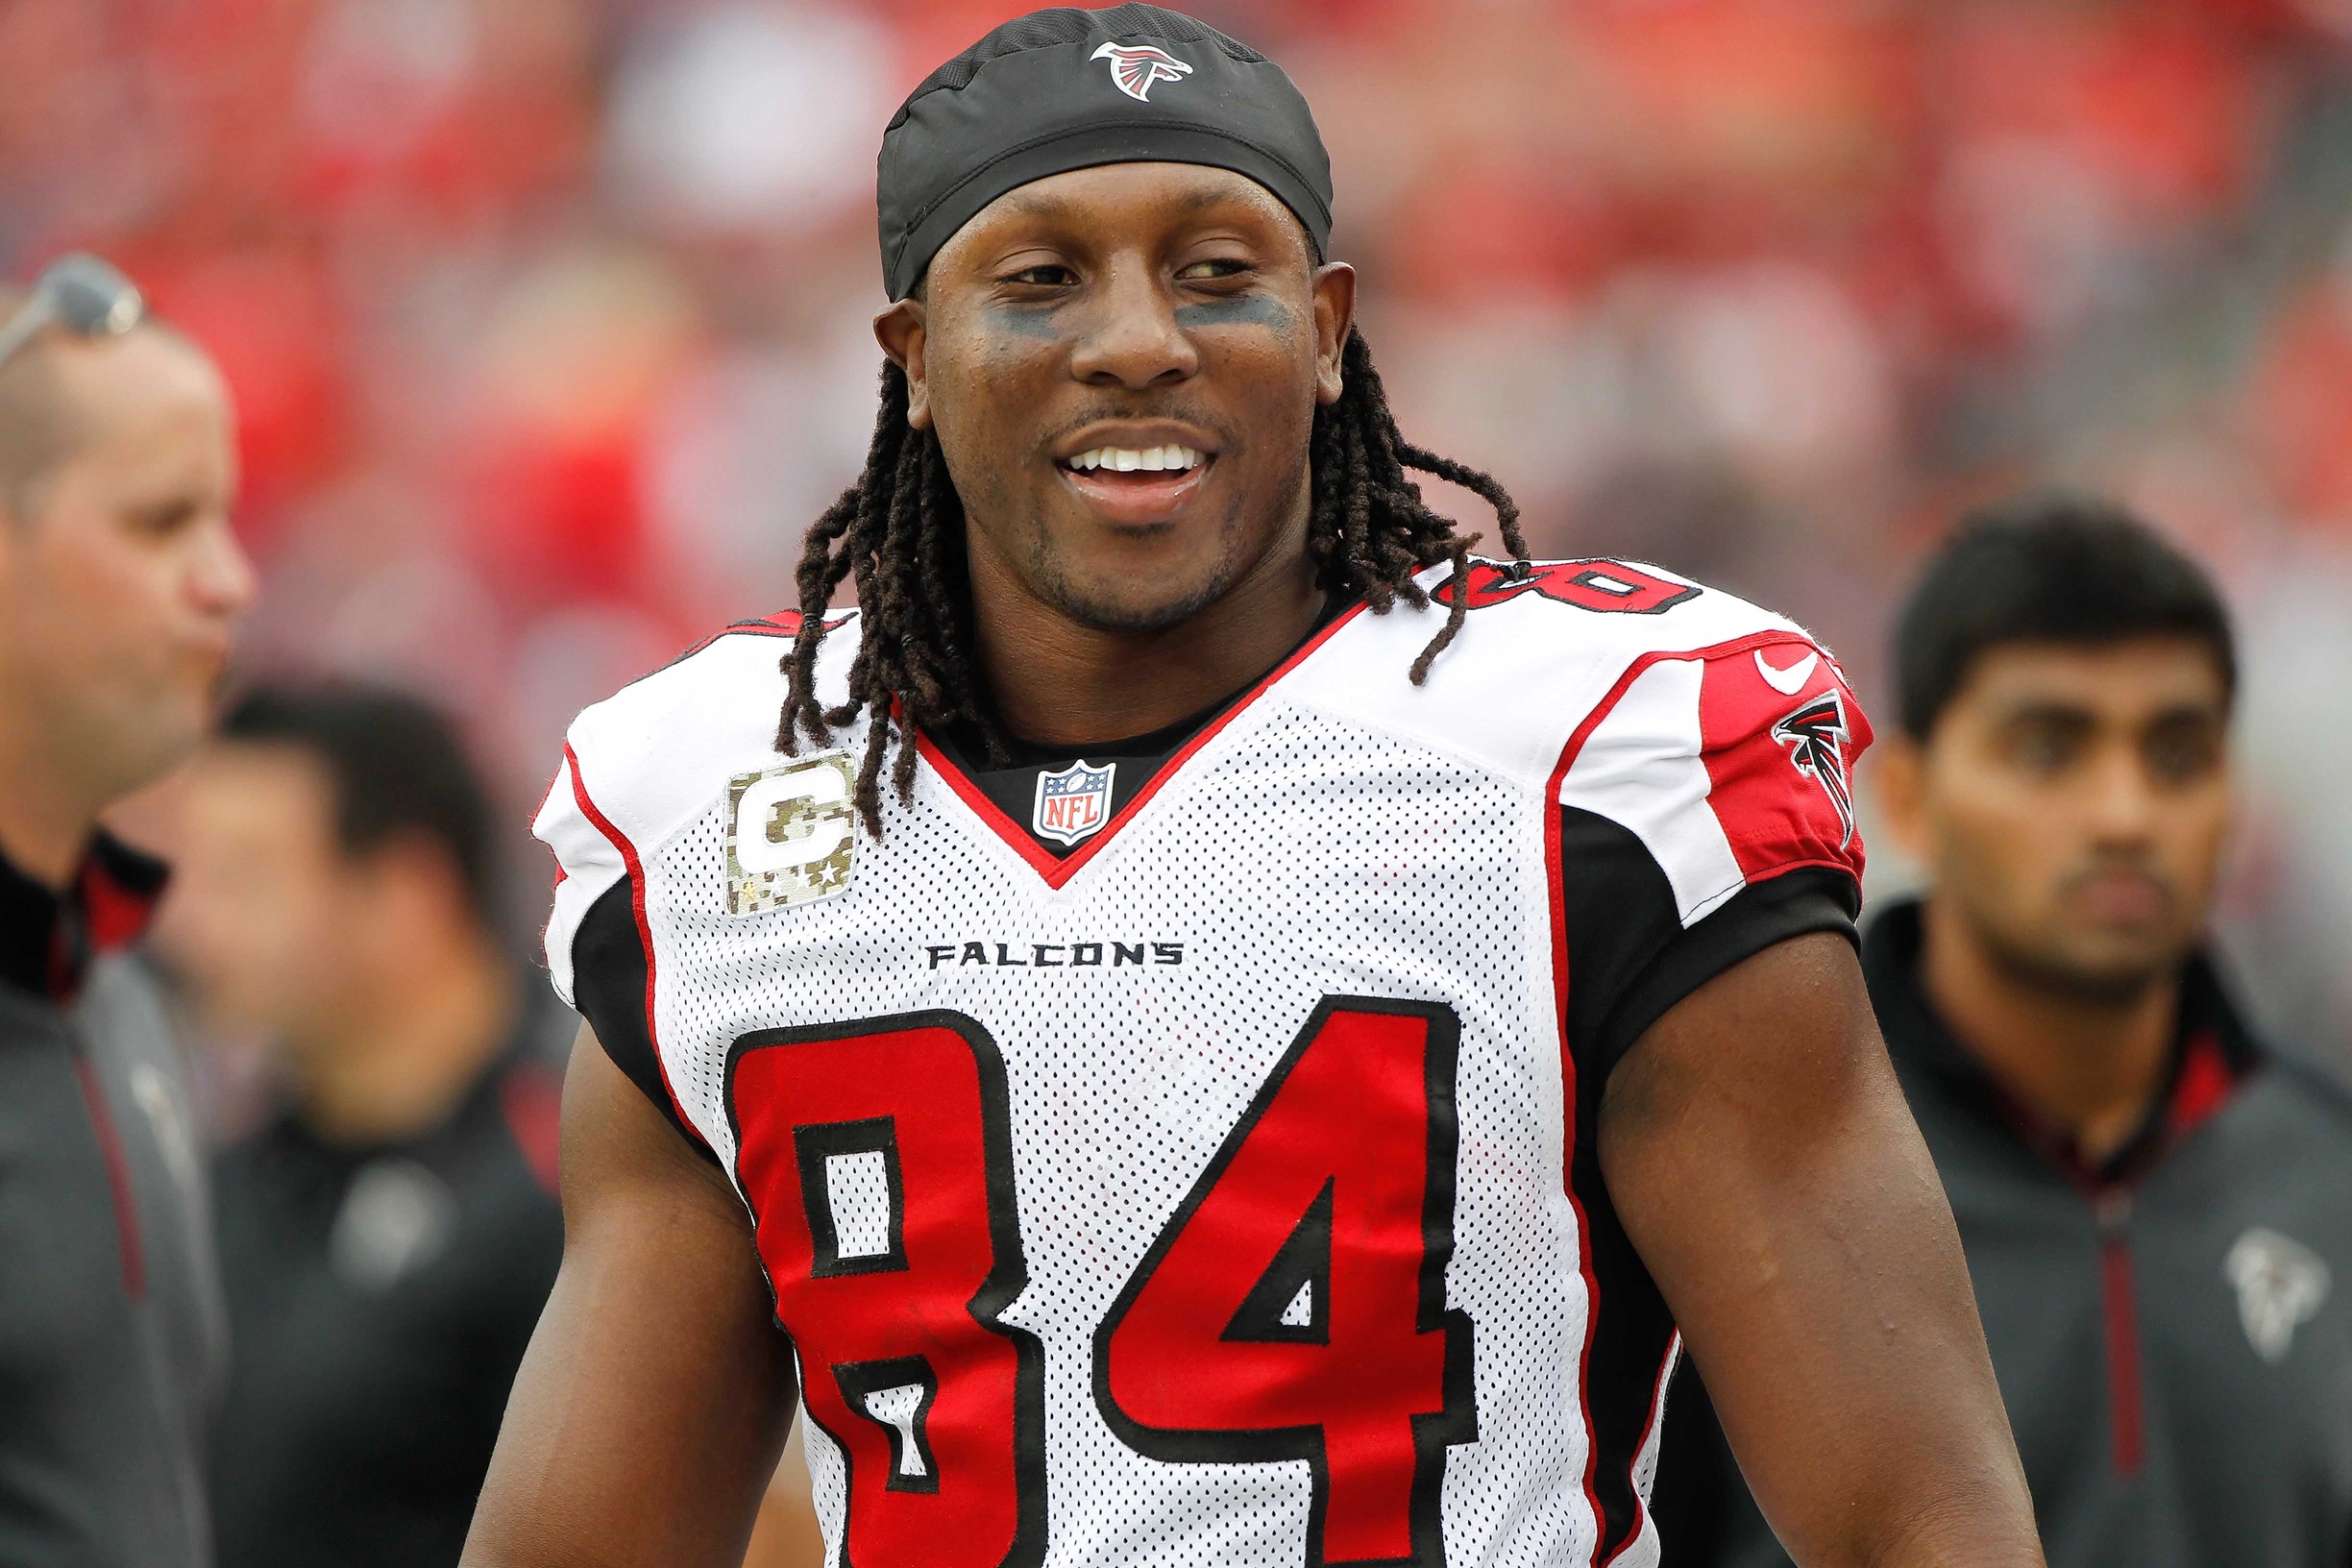 What is the best jersey in Falcons history? - The Falcoholic